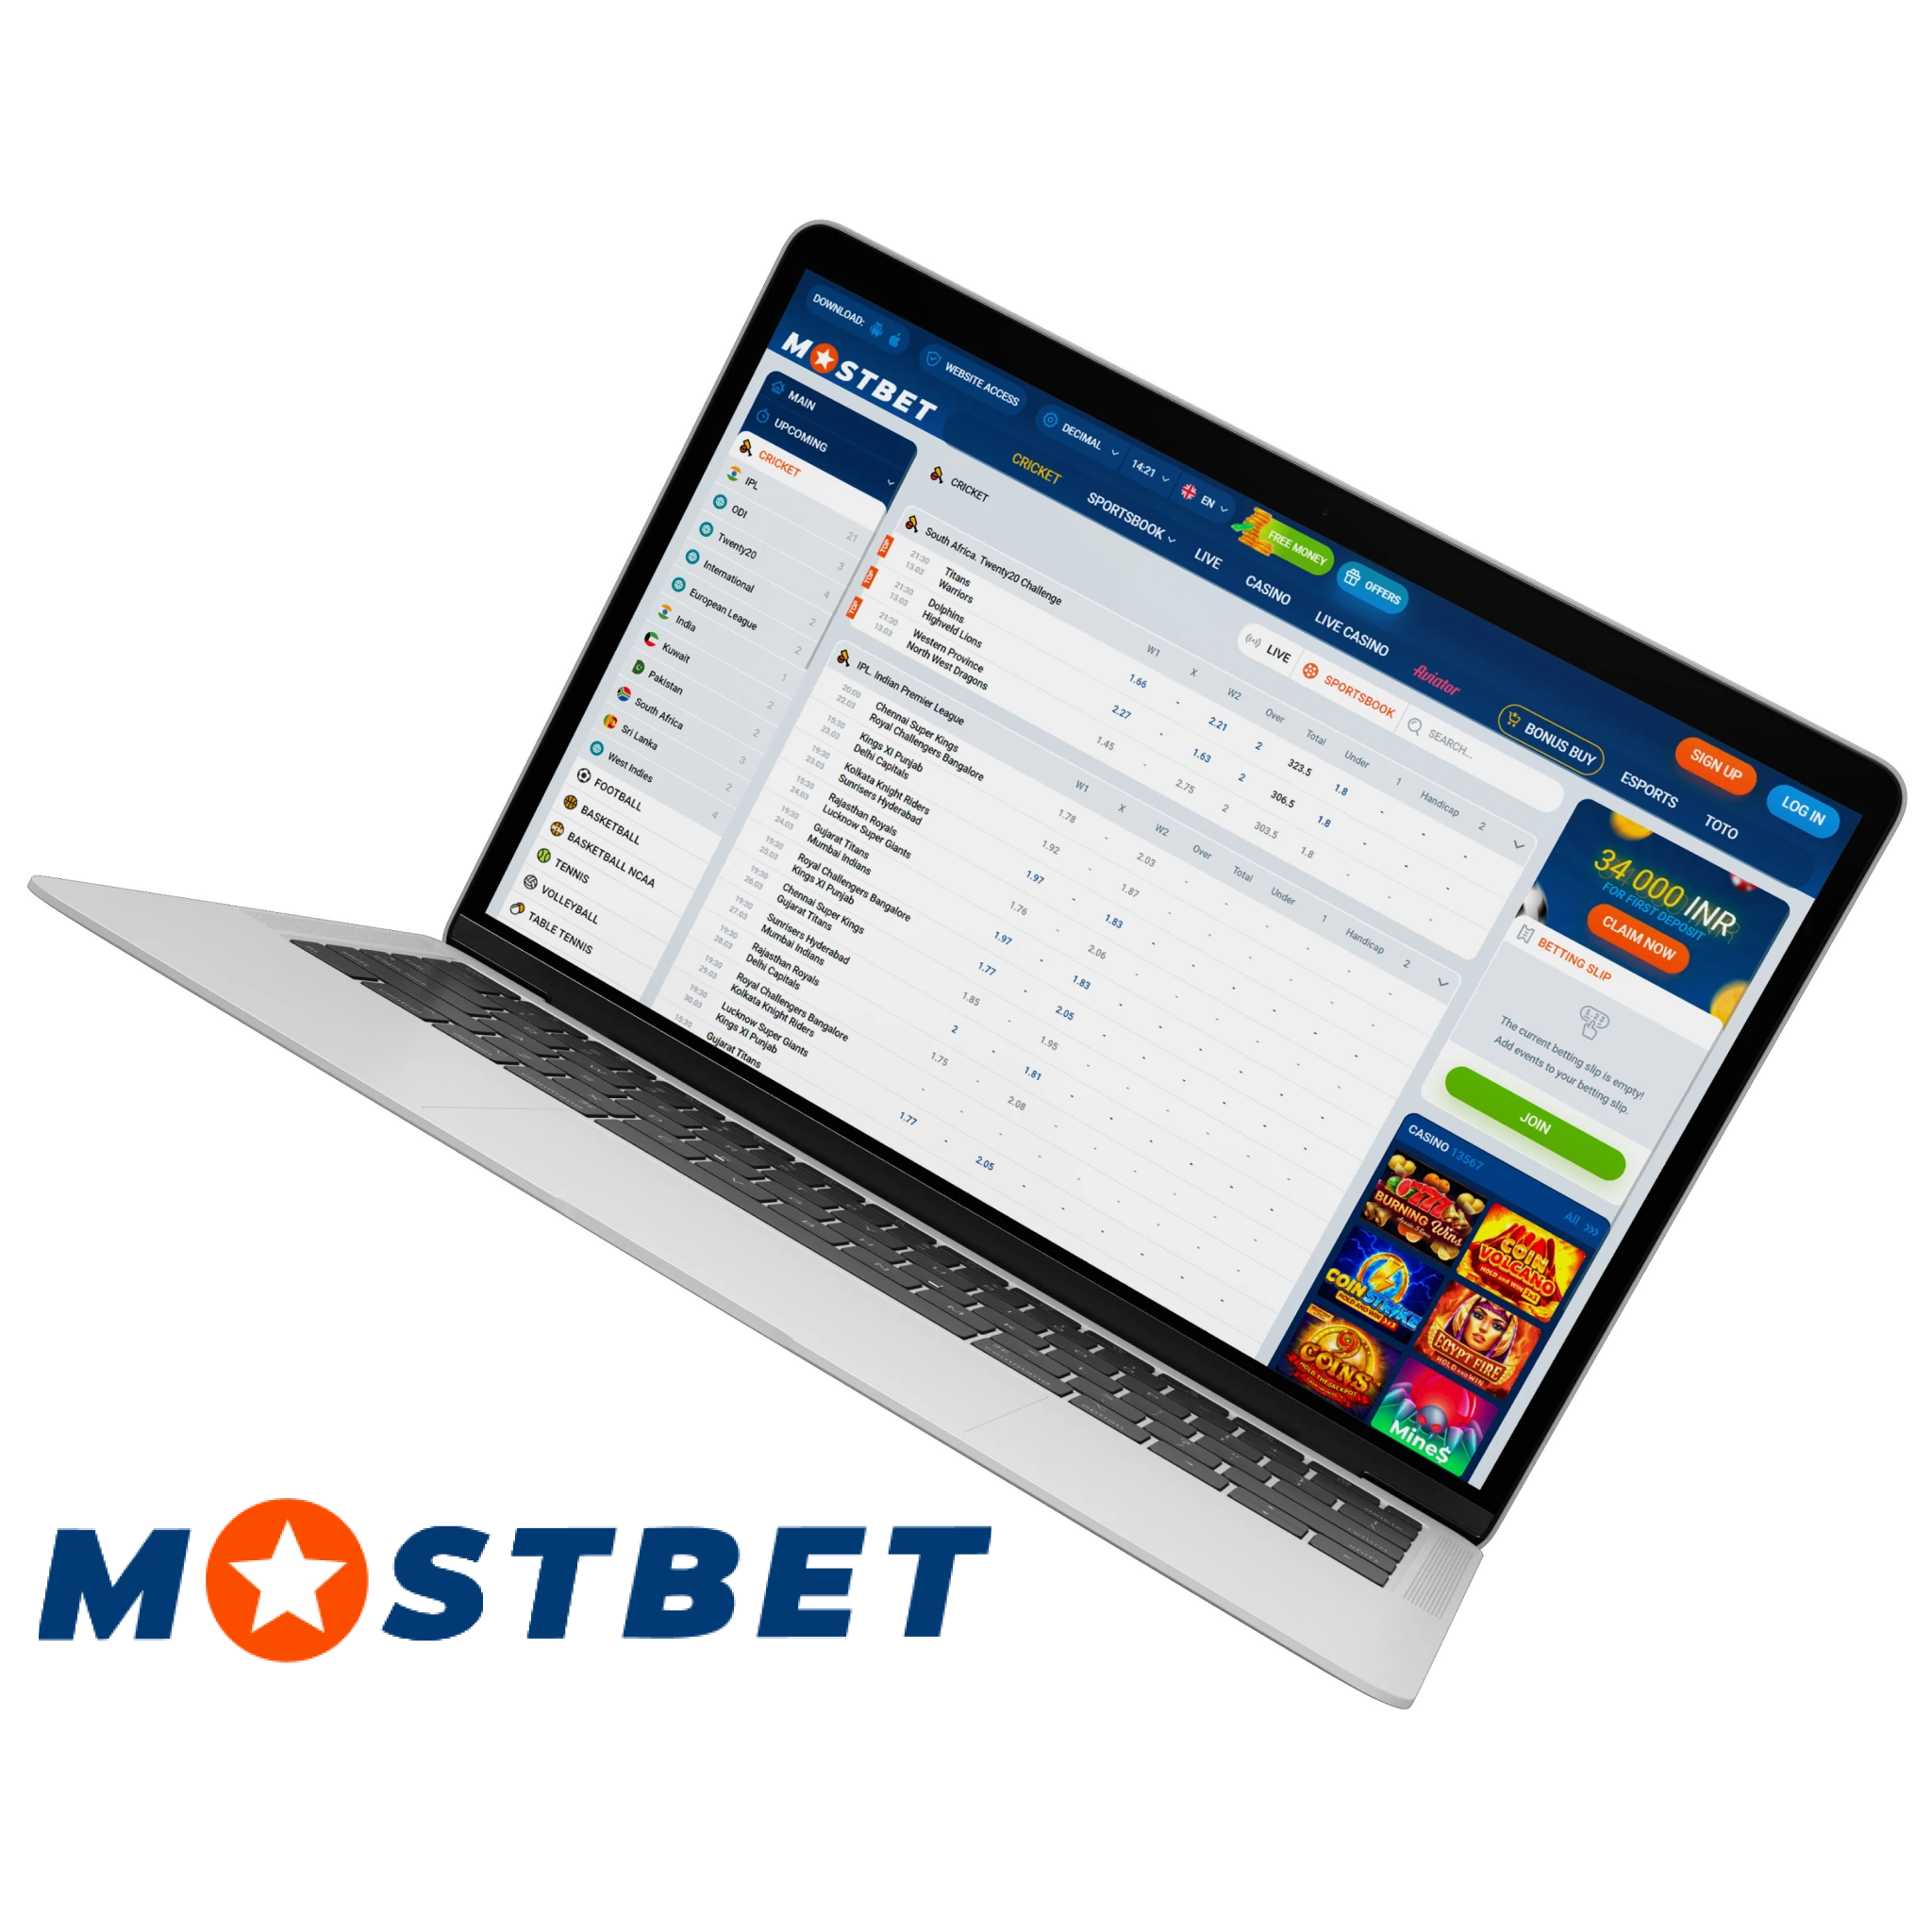 Explore the diverse betting options and wide-ranging features offered by Mostbet for a rewarding process.